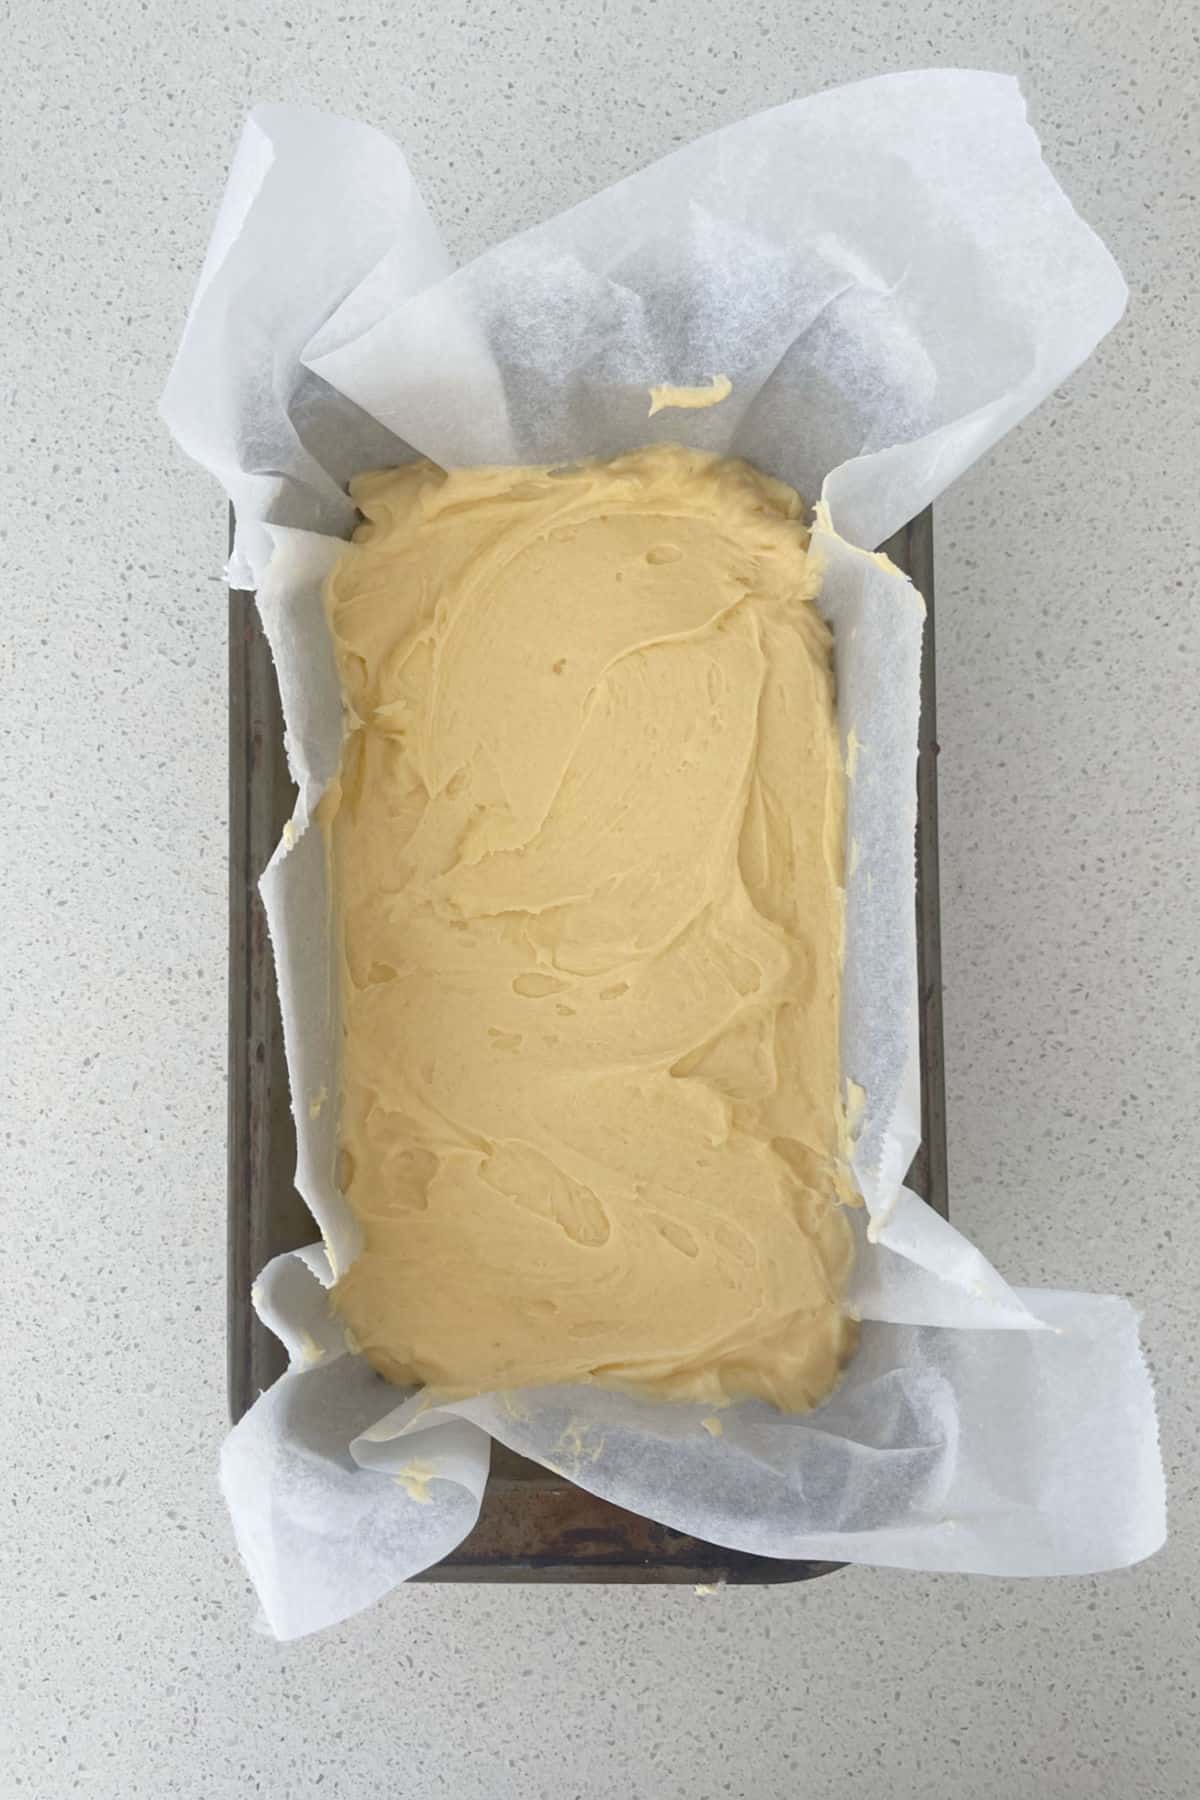 Pound Cake batter in a loaf tin.